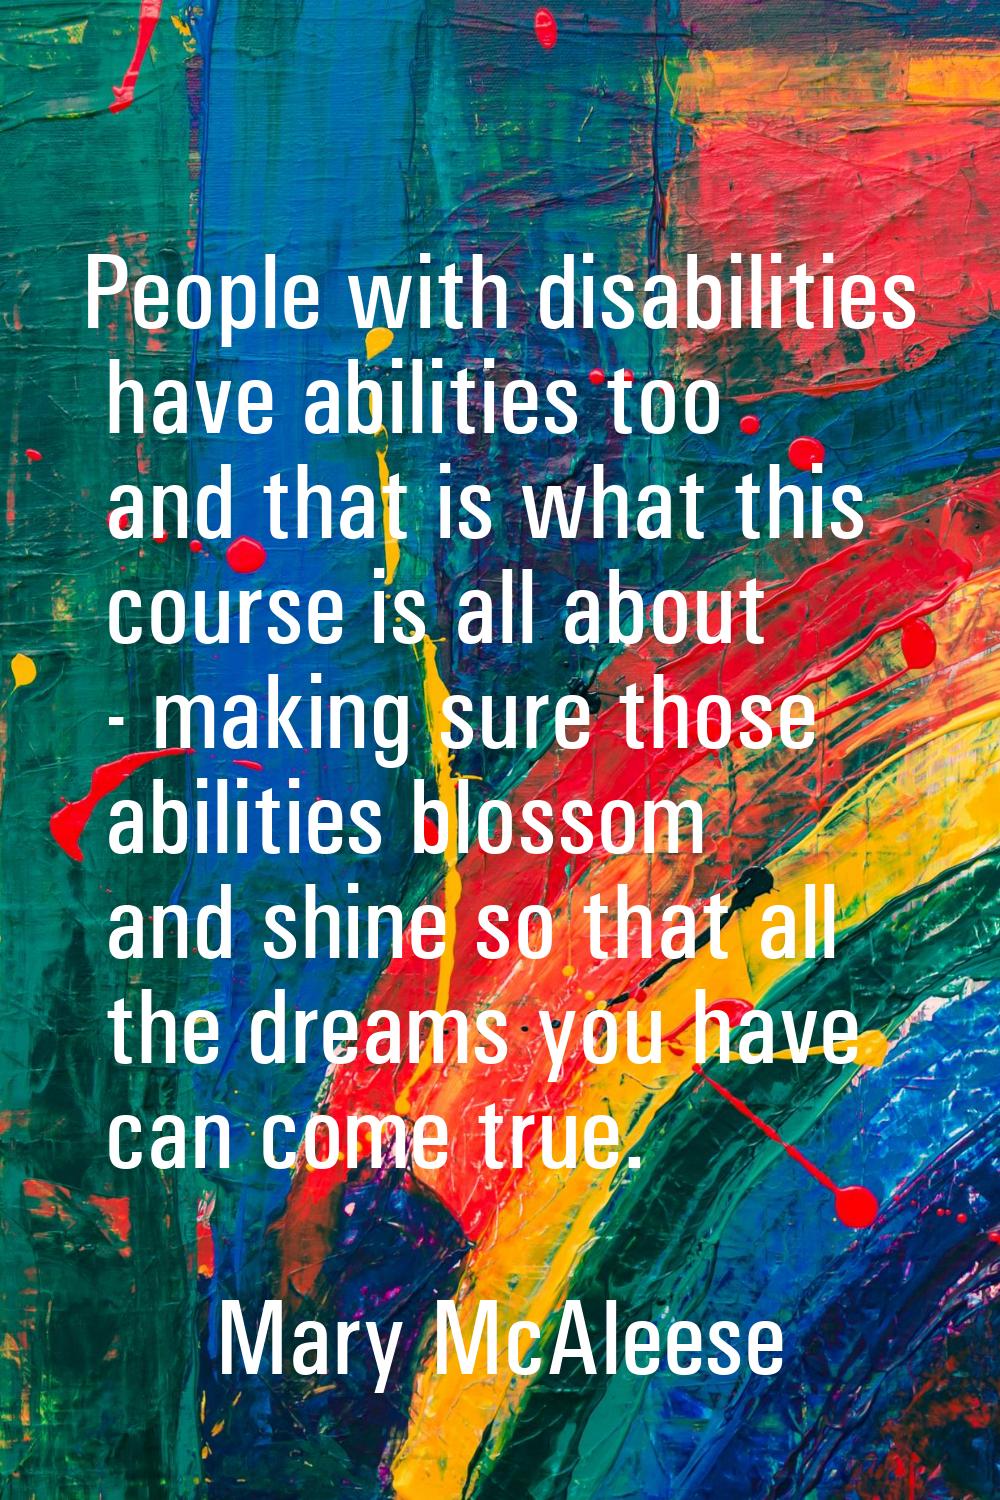 People with disabilities have abilities too and that is what this course is all about - making sure